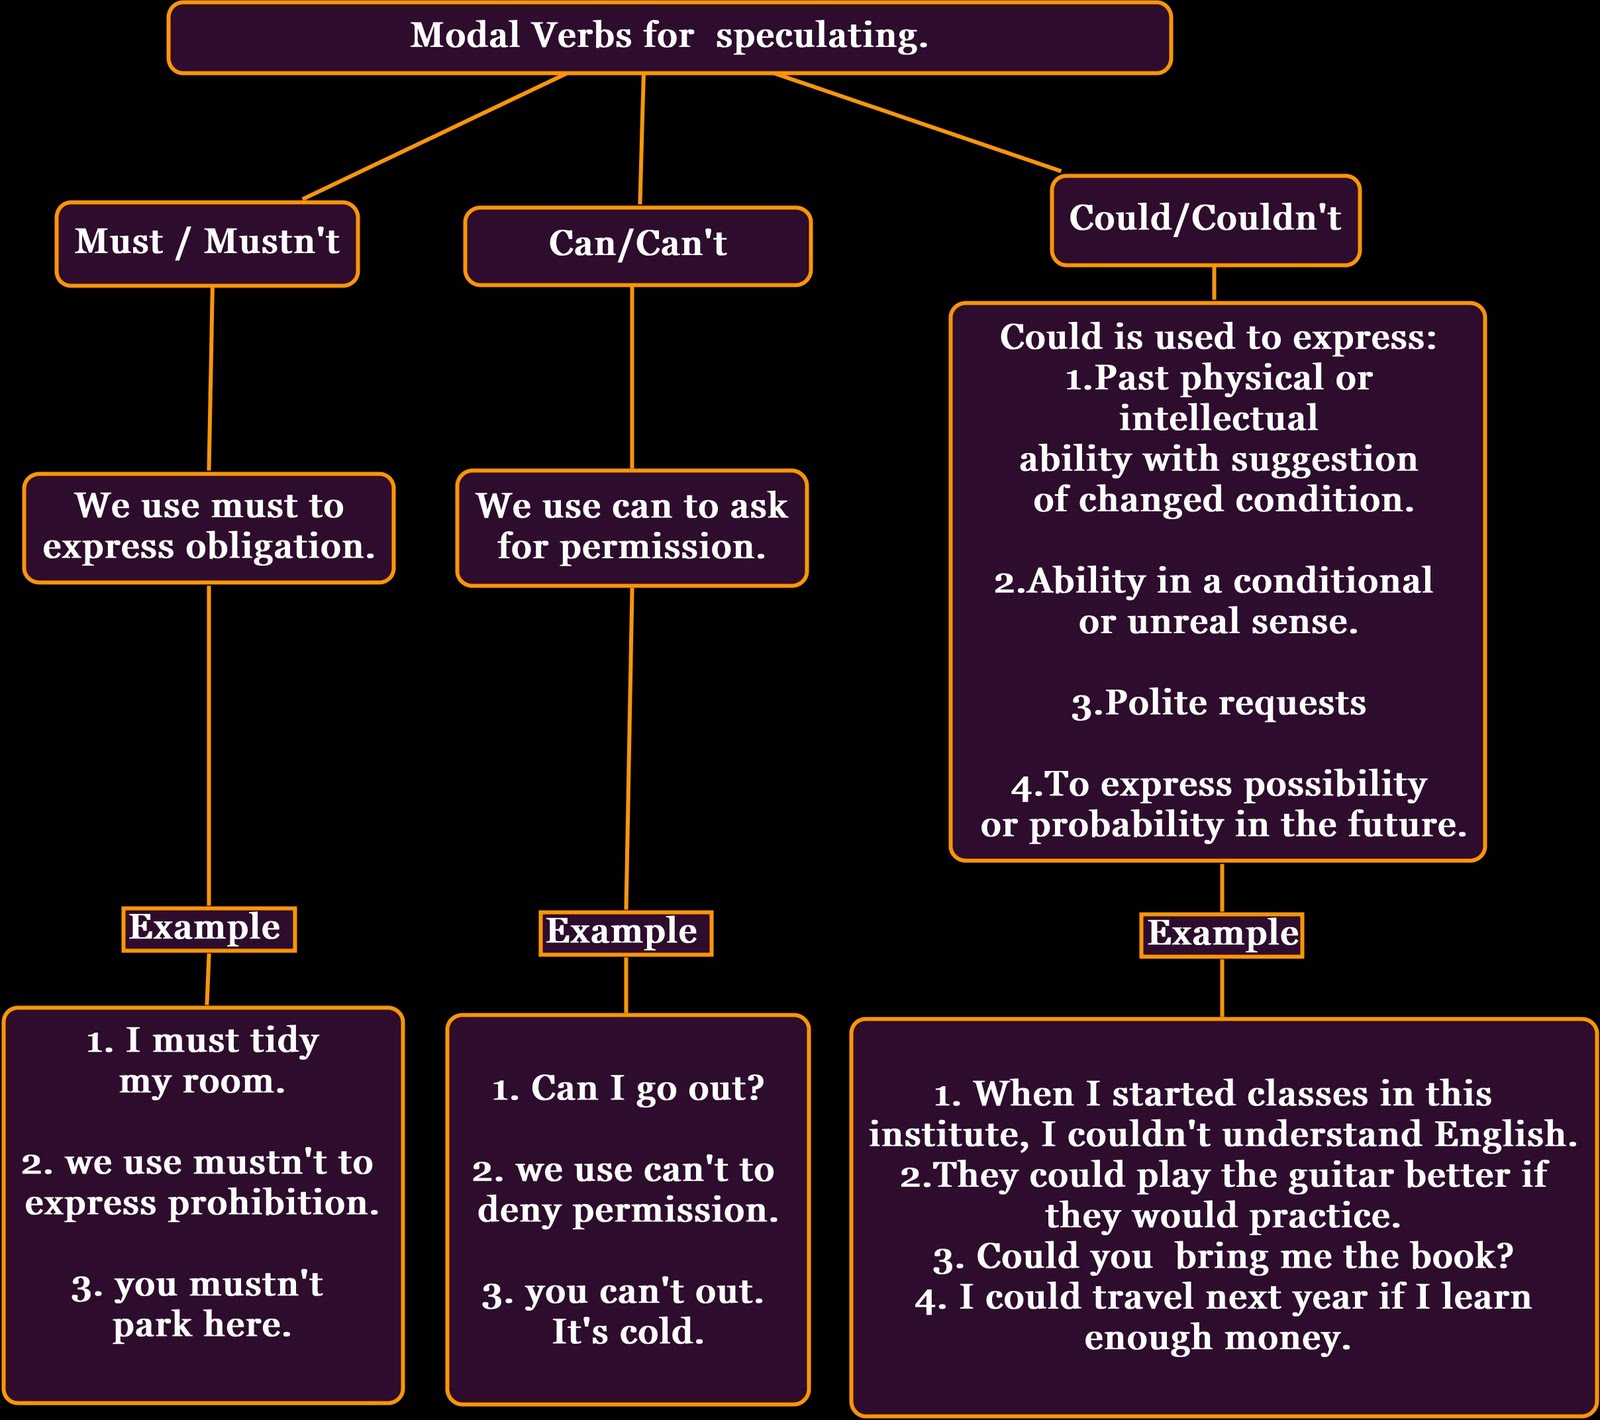 my-english-pages-online-modal-verbs